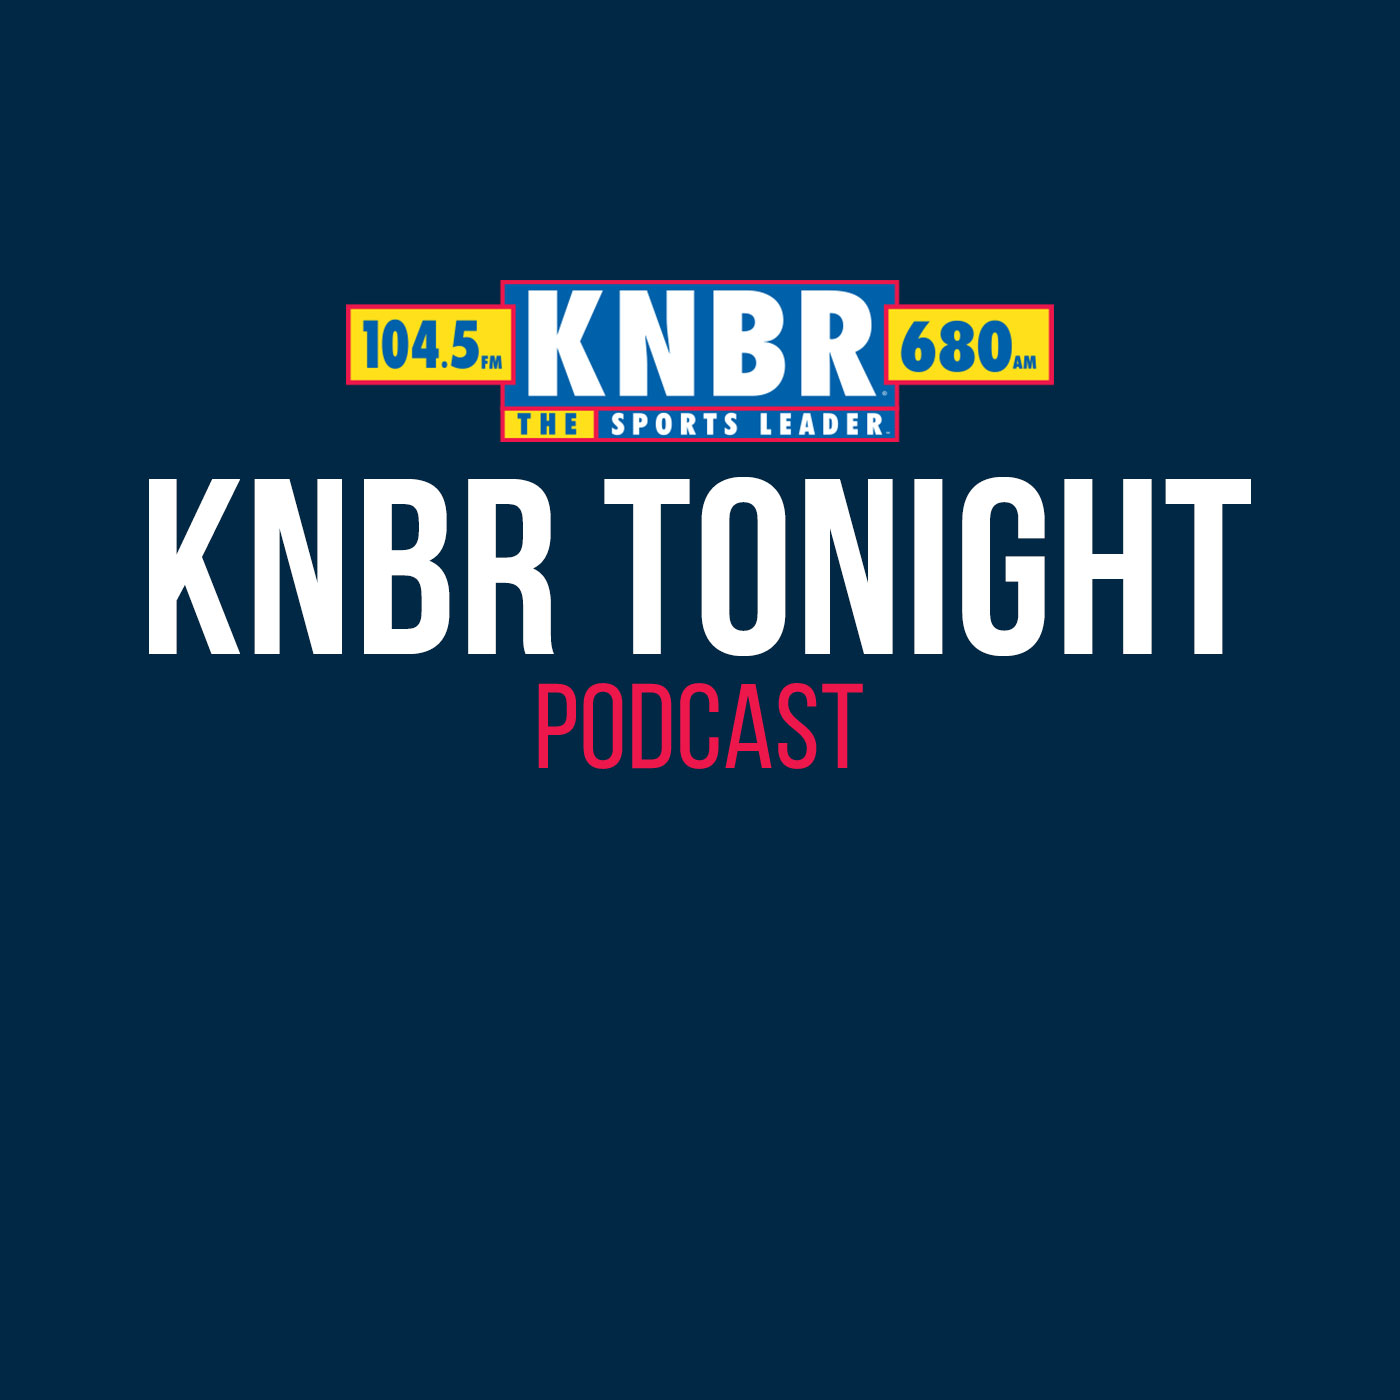 3-11 Josh Edwards joins KNBR Tonight with Dieter to talk about the latest offseason NFL  news